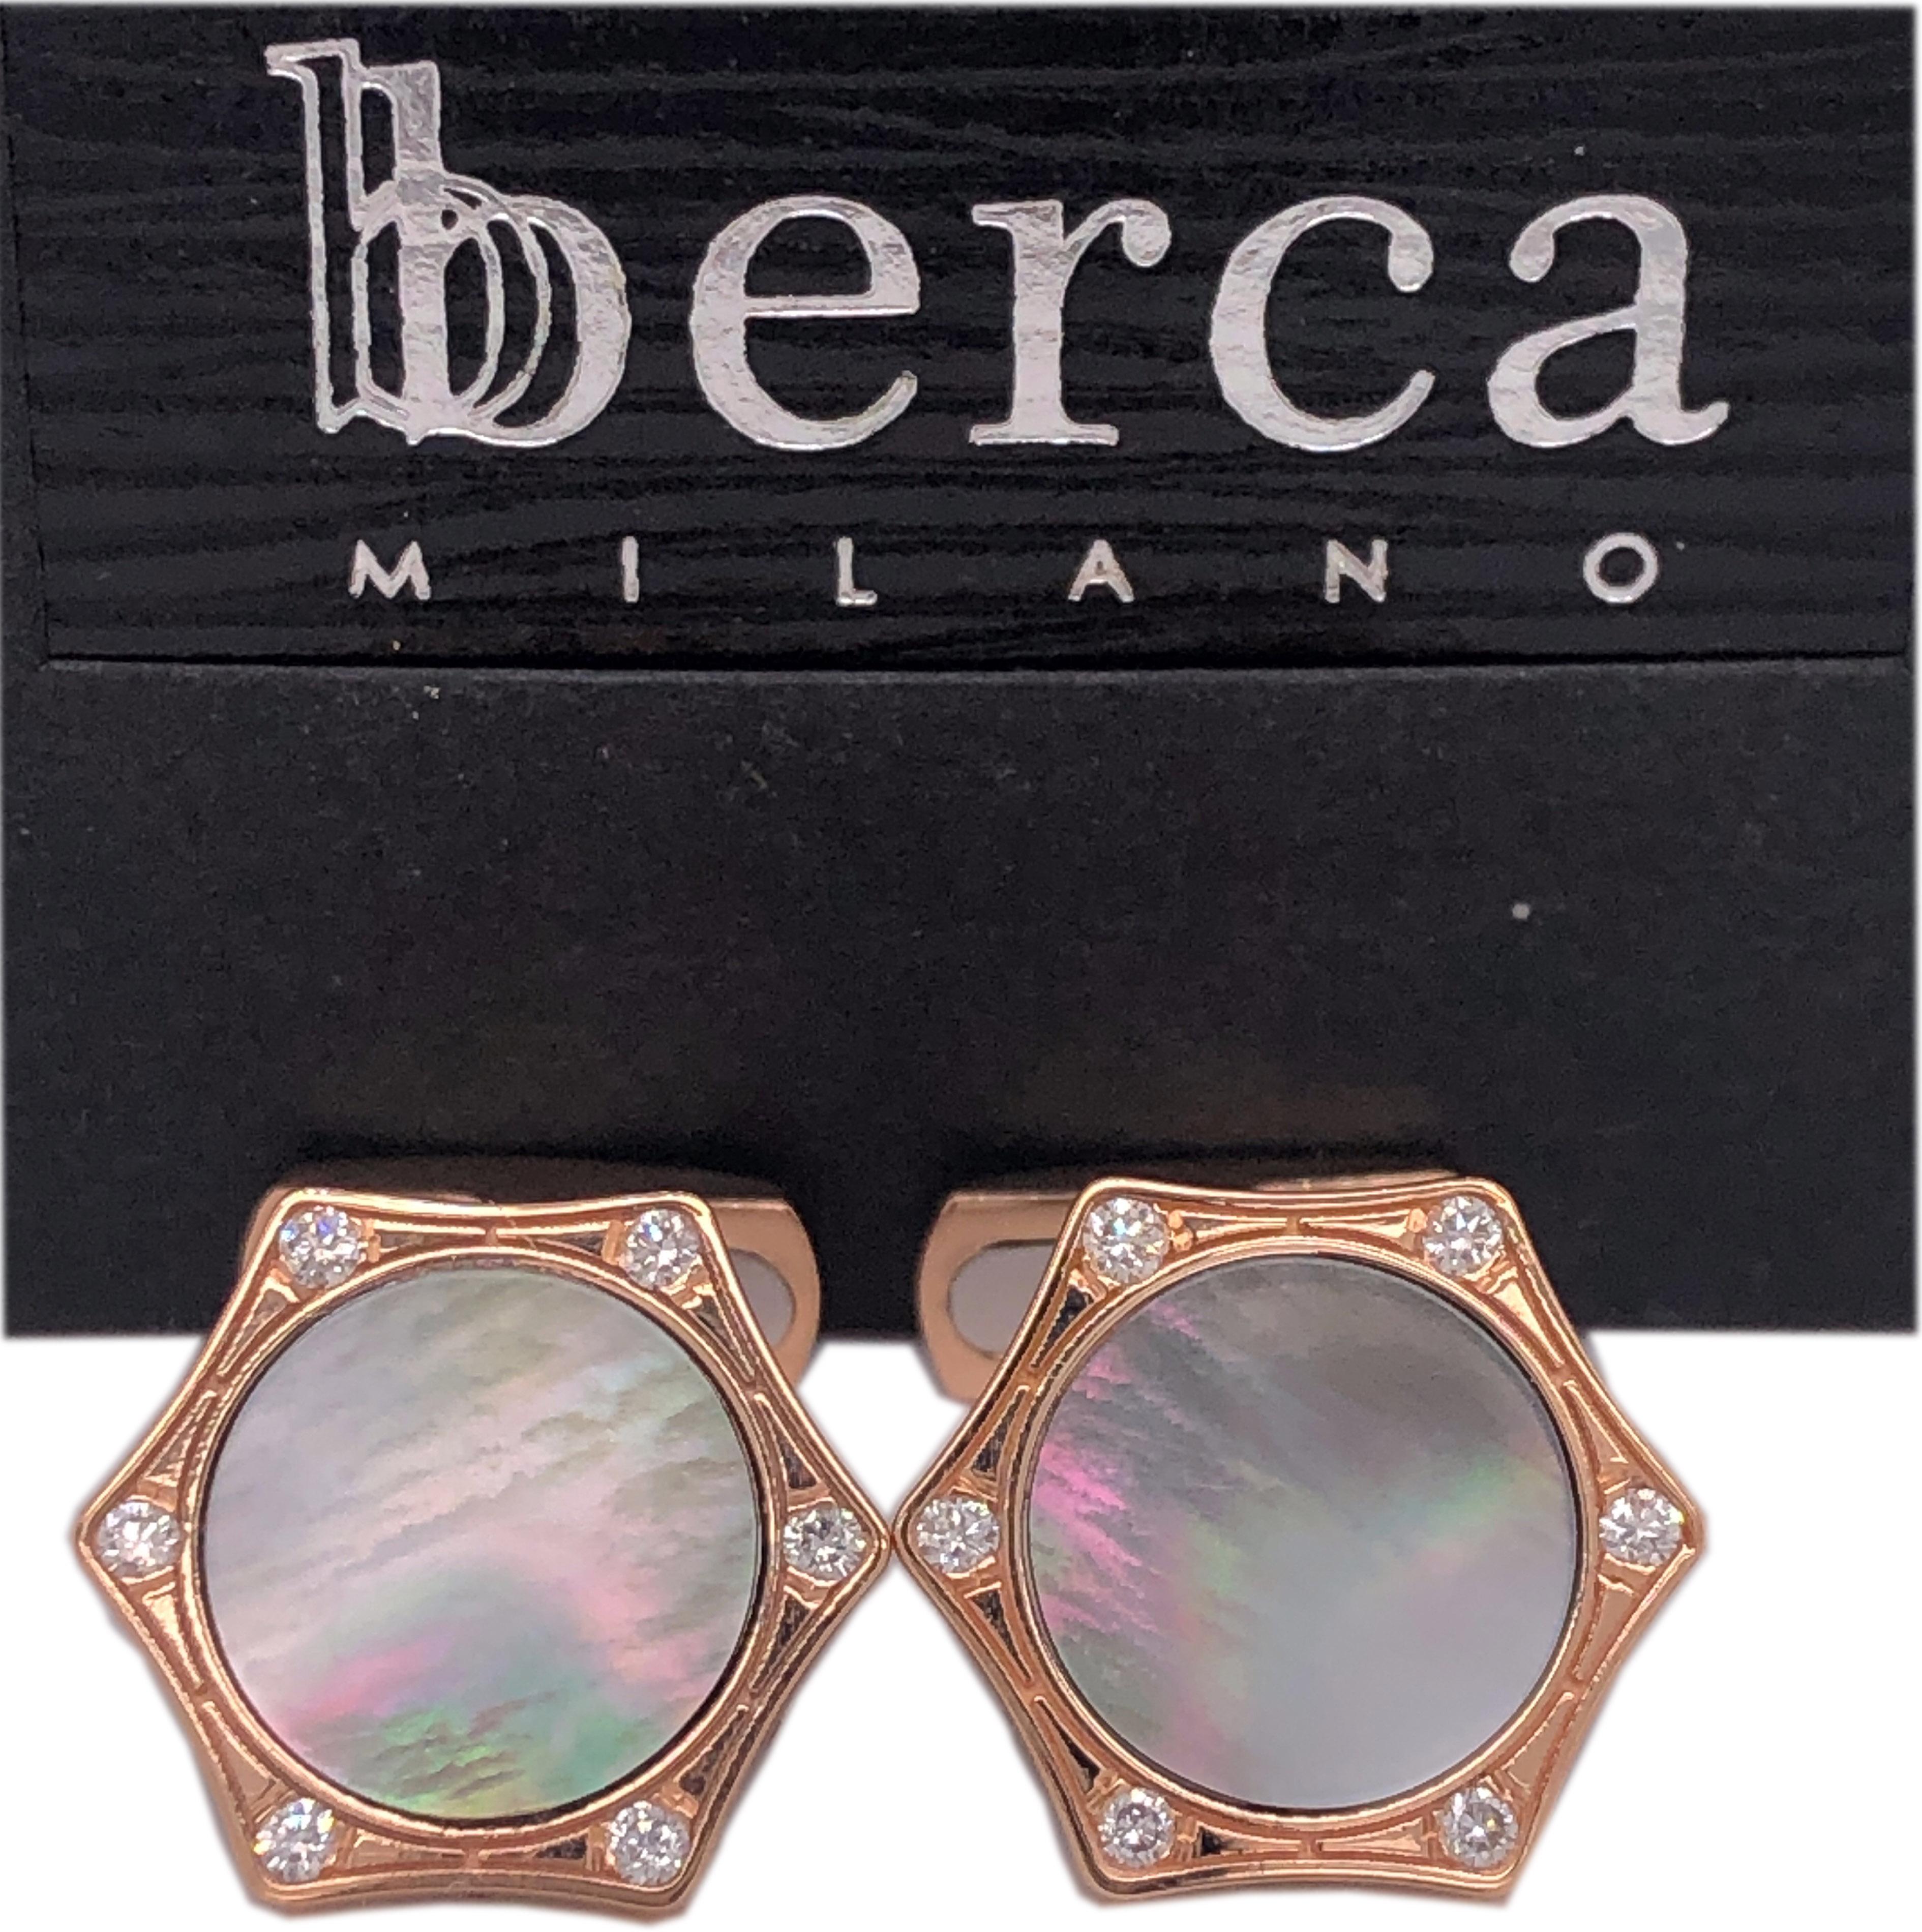 Smart, Chic, yet Timeless pair of Cufflinks featuring 0.22Kt White Diamond, Light Grey Mother-of-pearl hand enameled disk in an 18K Rose Gold Setting. 
Hand enameled  Mother of pearl shows magic iridescent shades from pale beige to peacock green to